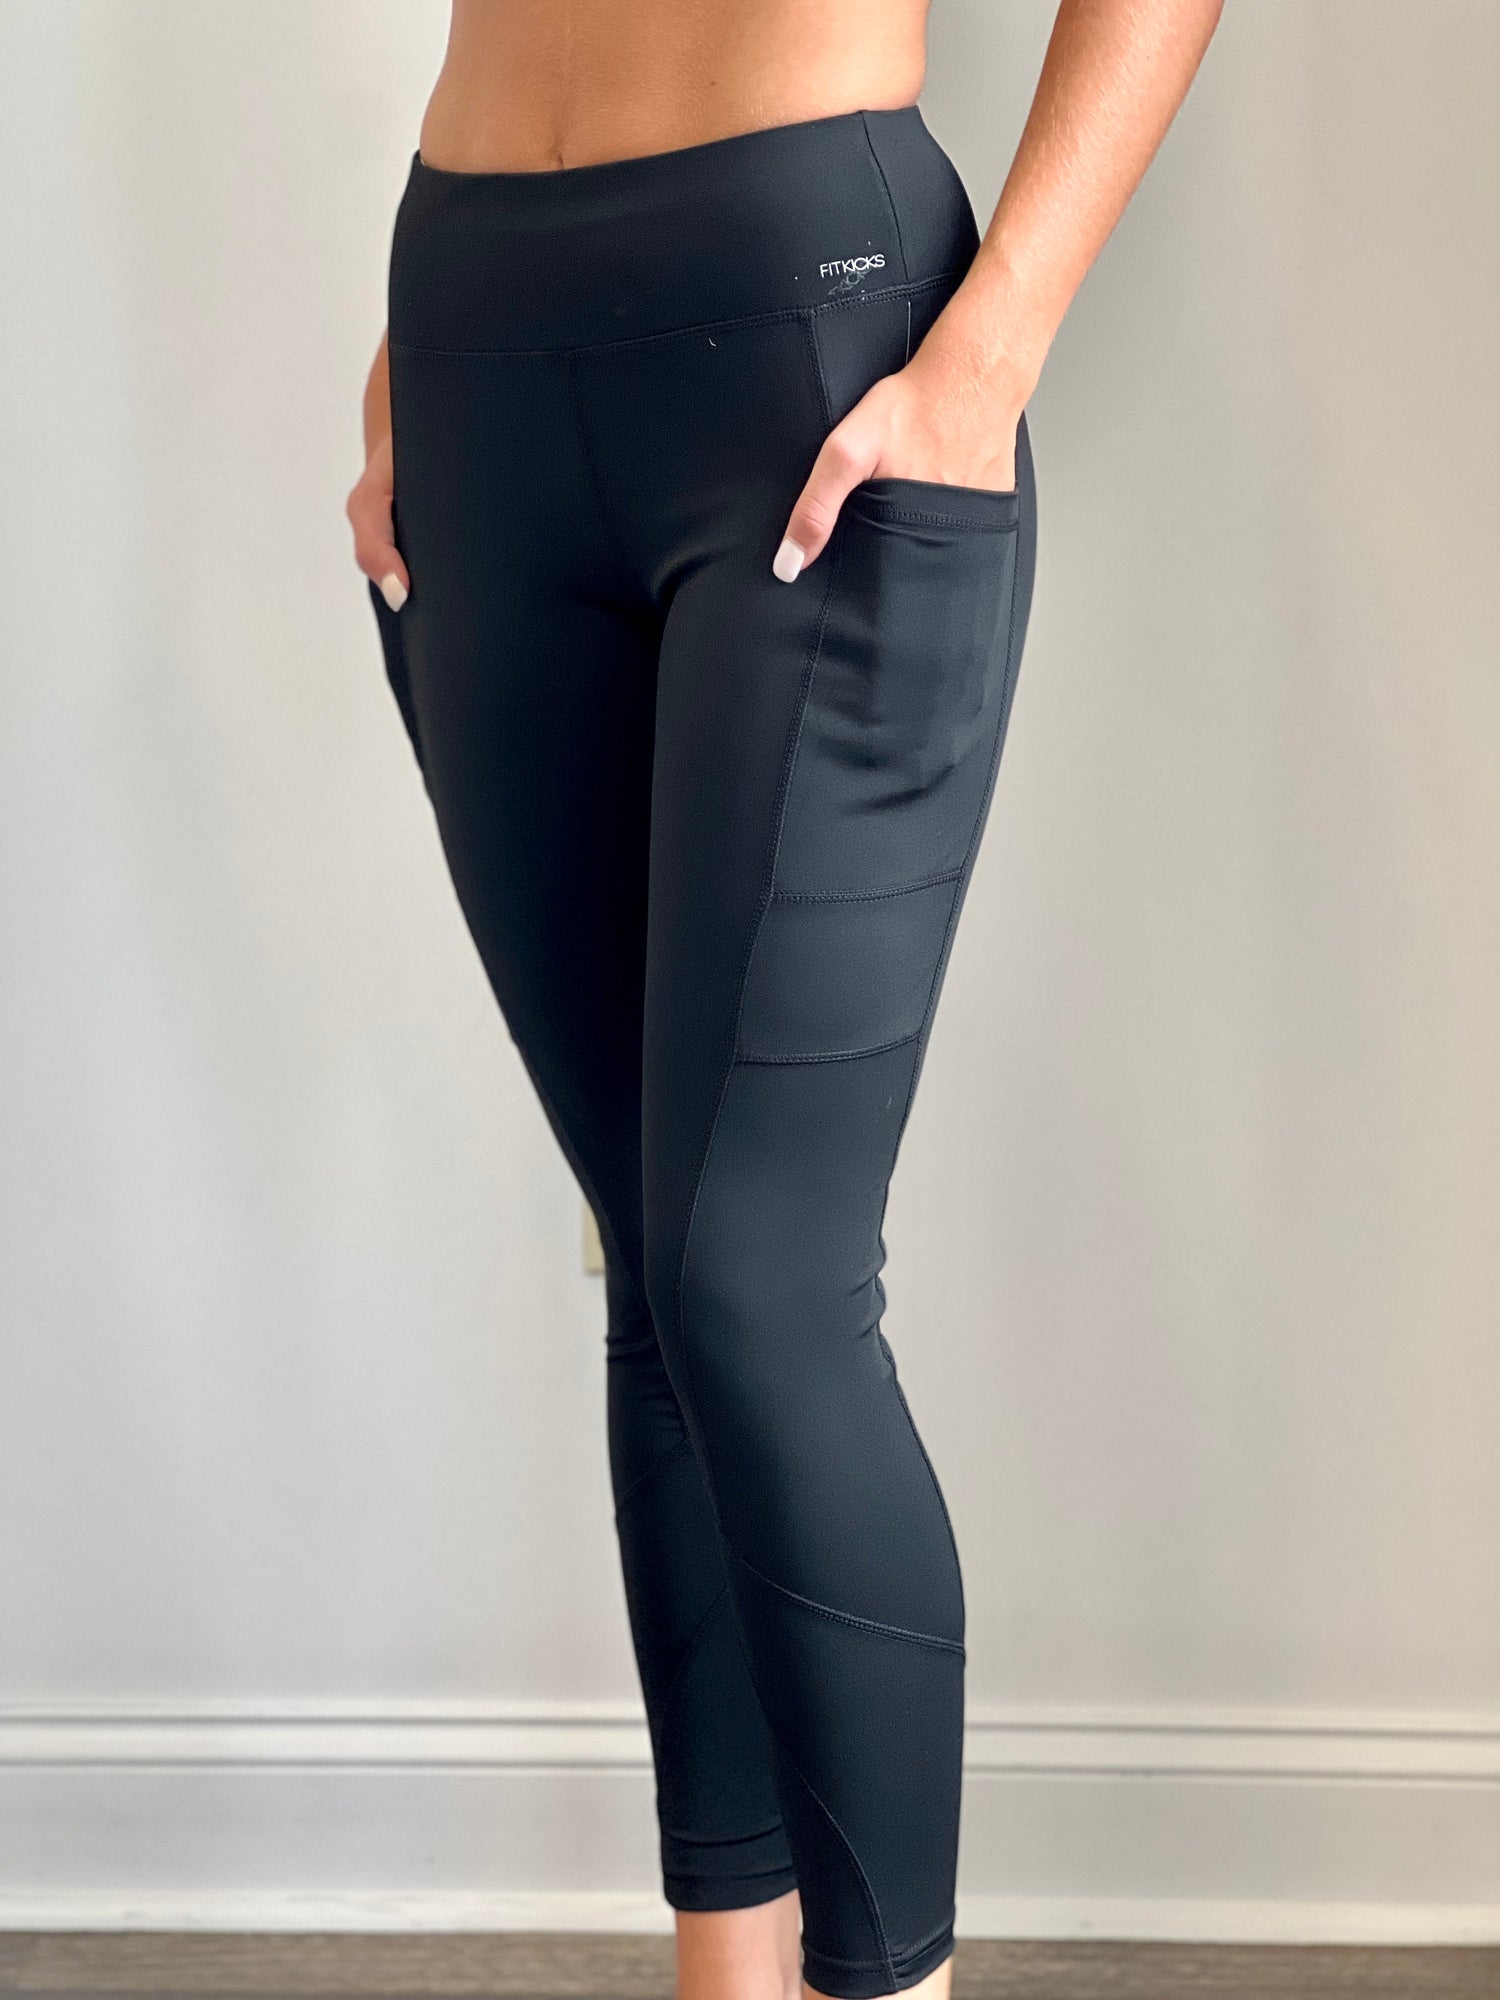 Mia Comfort Style Leggings – Allie and Me Boutique